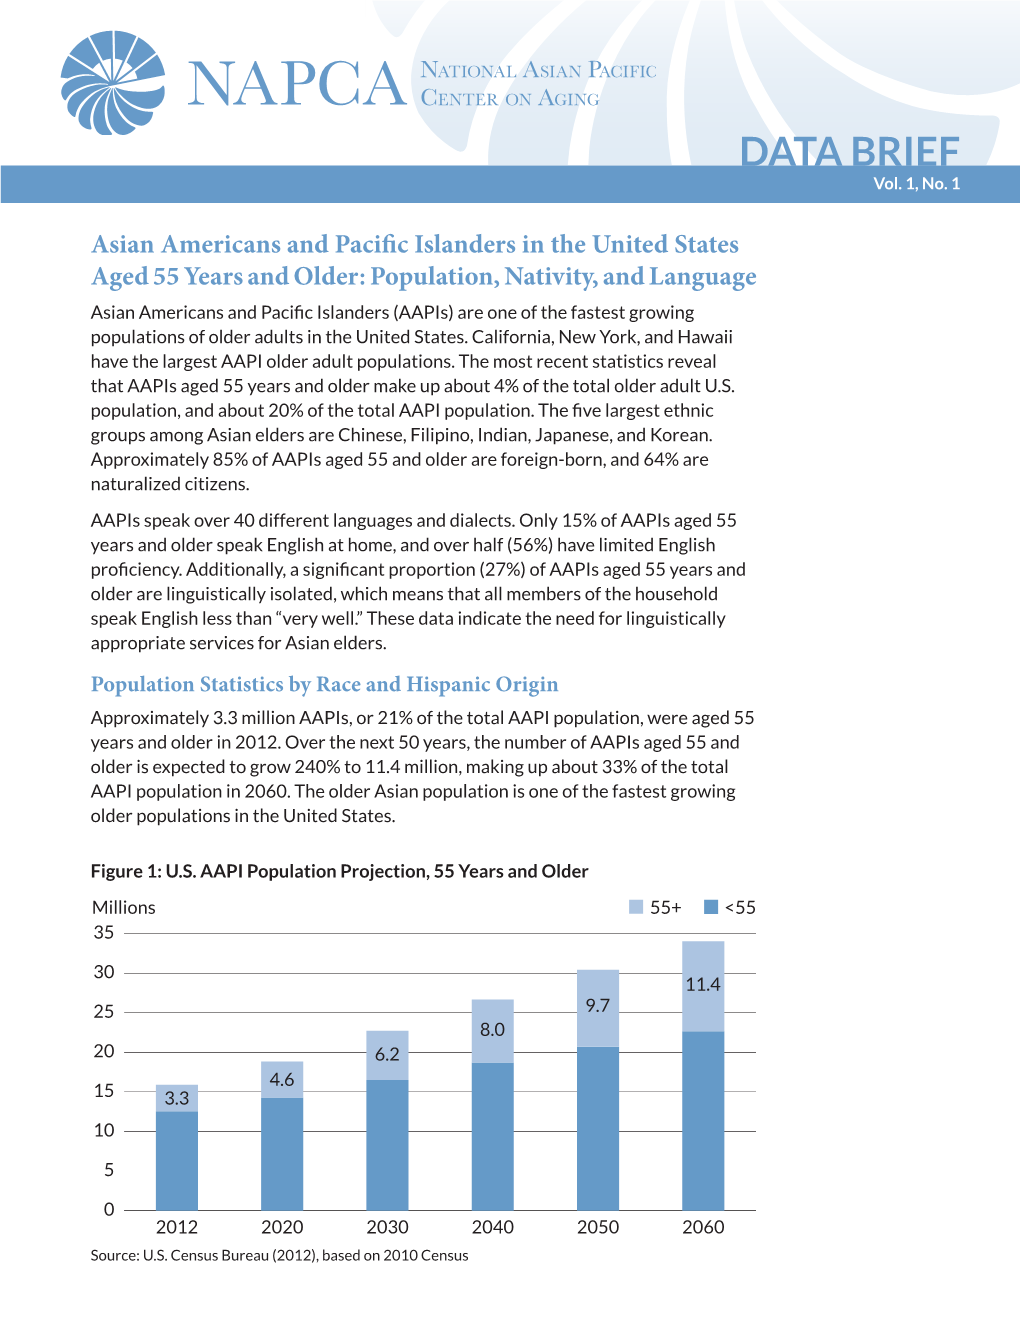 Asian Americans and Pacific Islanders in the United States Aged 55 Years